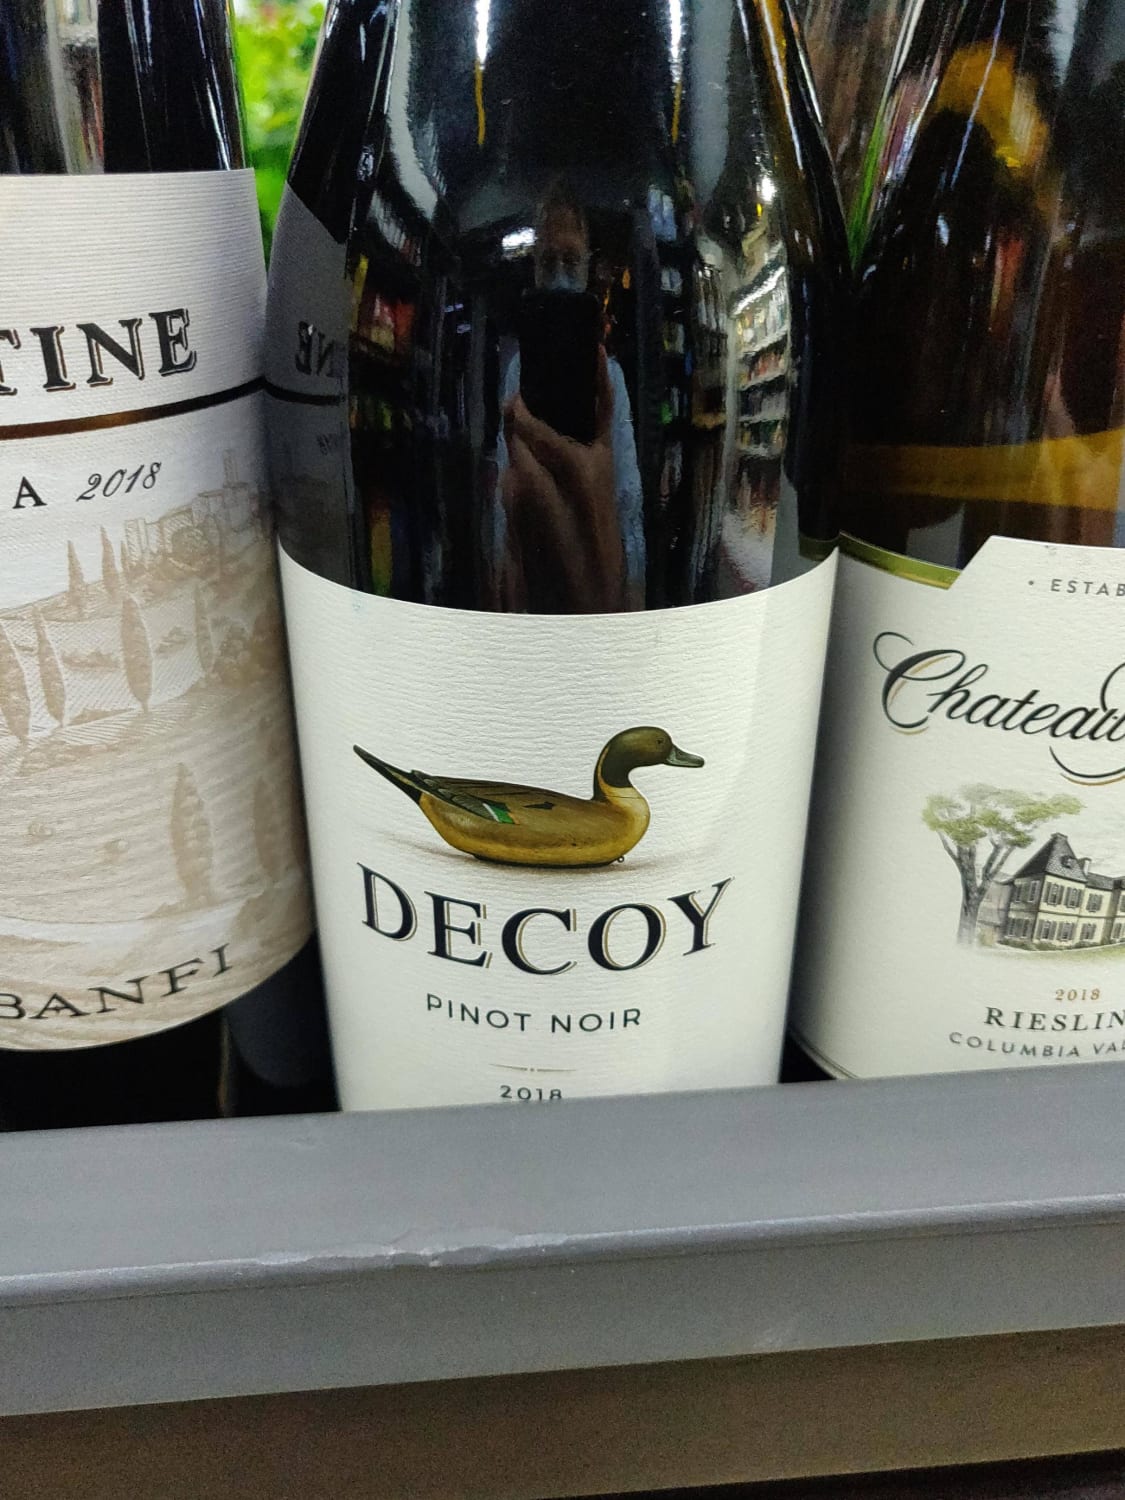 They've got their own wine in Costa Rica now...